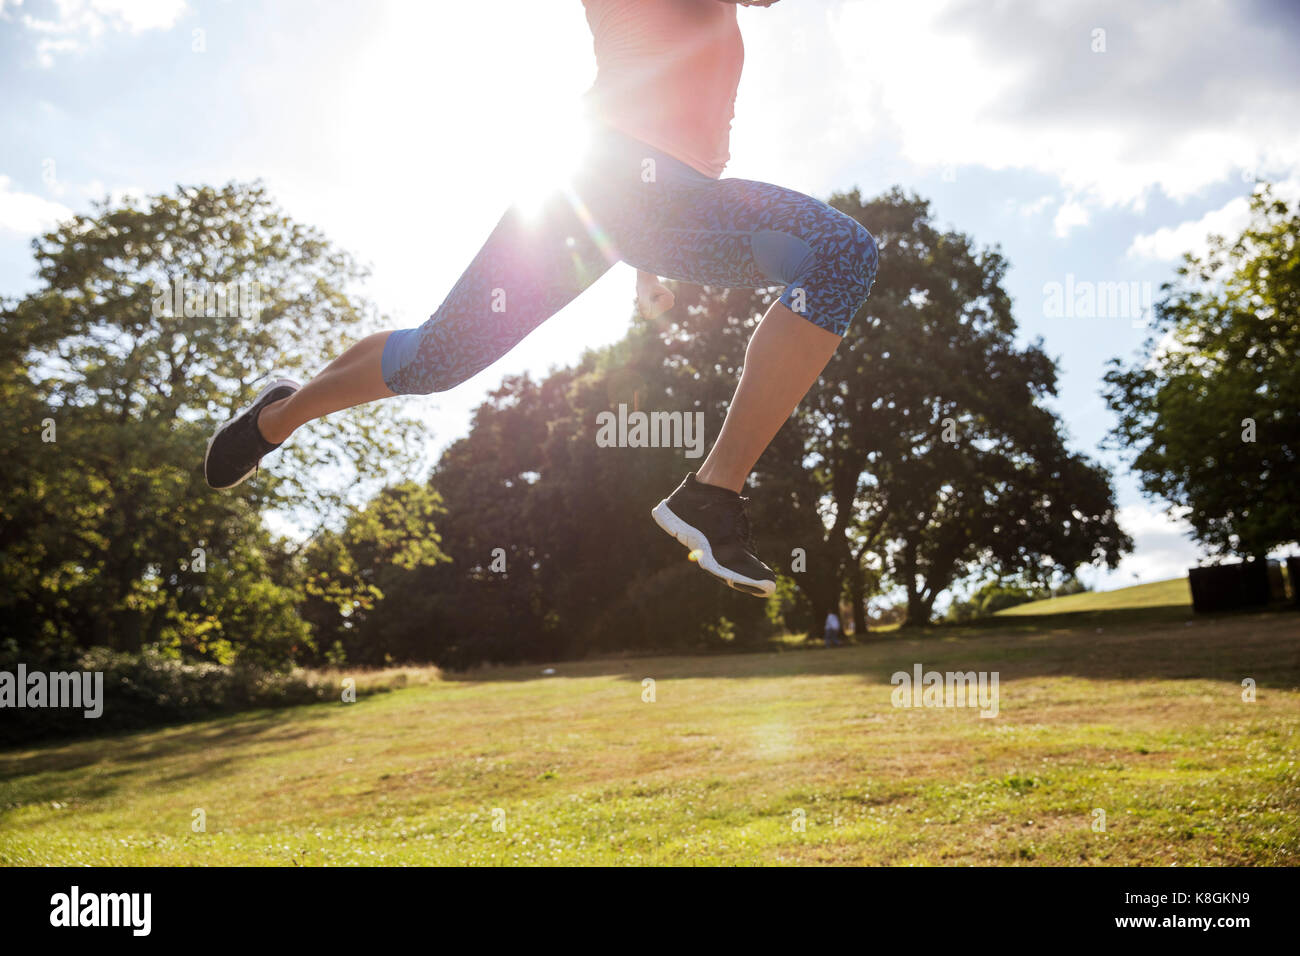 Waist down view of young woman training in park, leaping mid air in sunlight Stock Photo